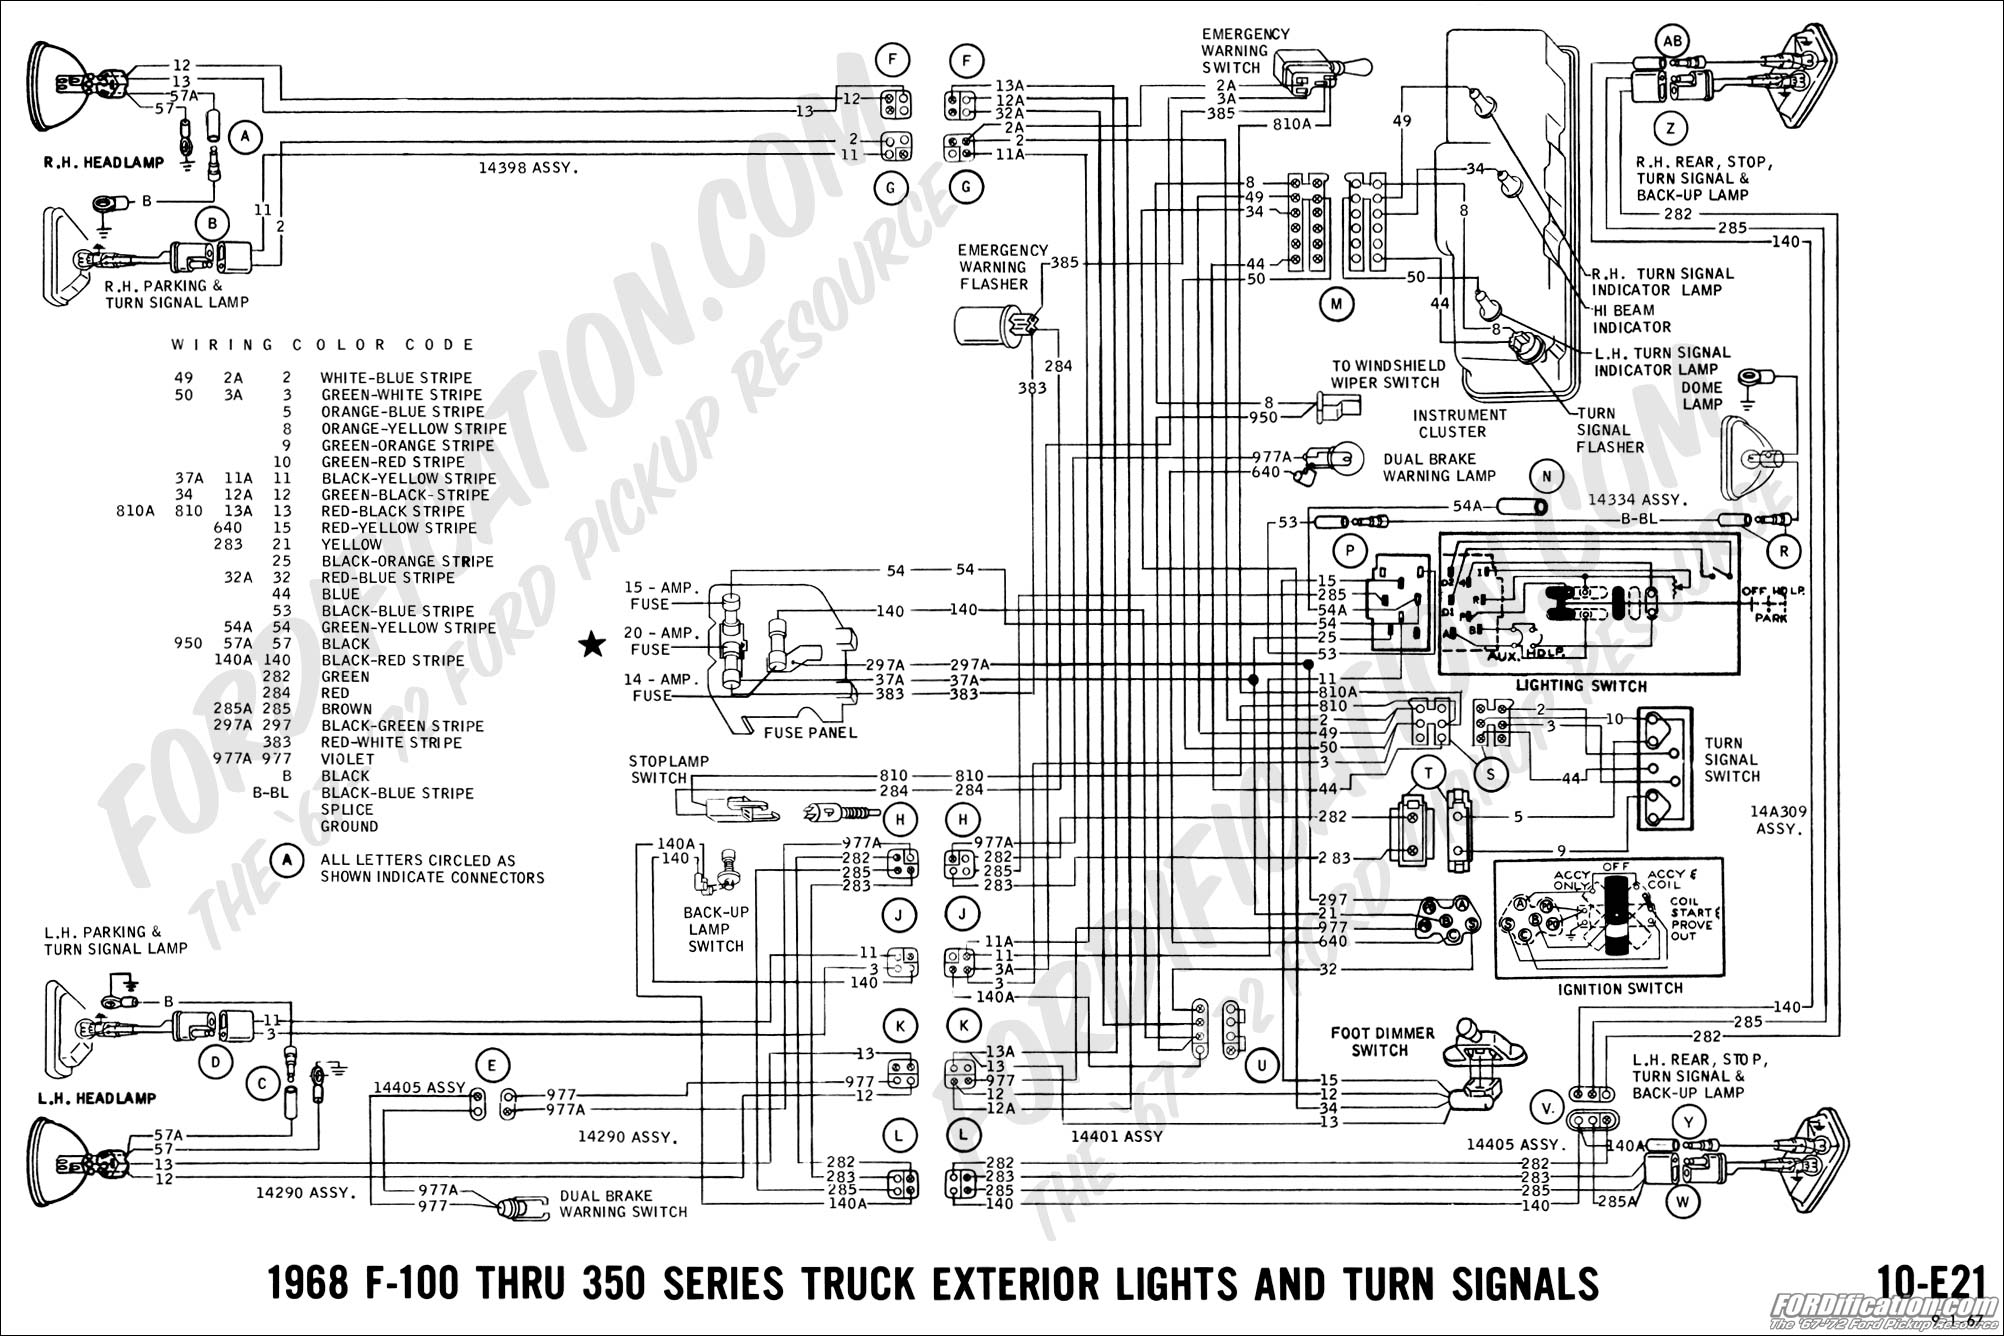 2001 Ford F250 Wiring Diagram from www.fordification.com